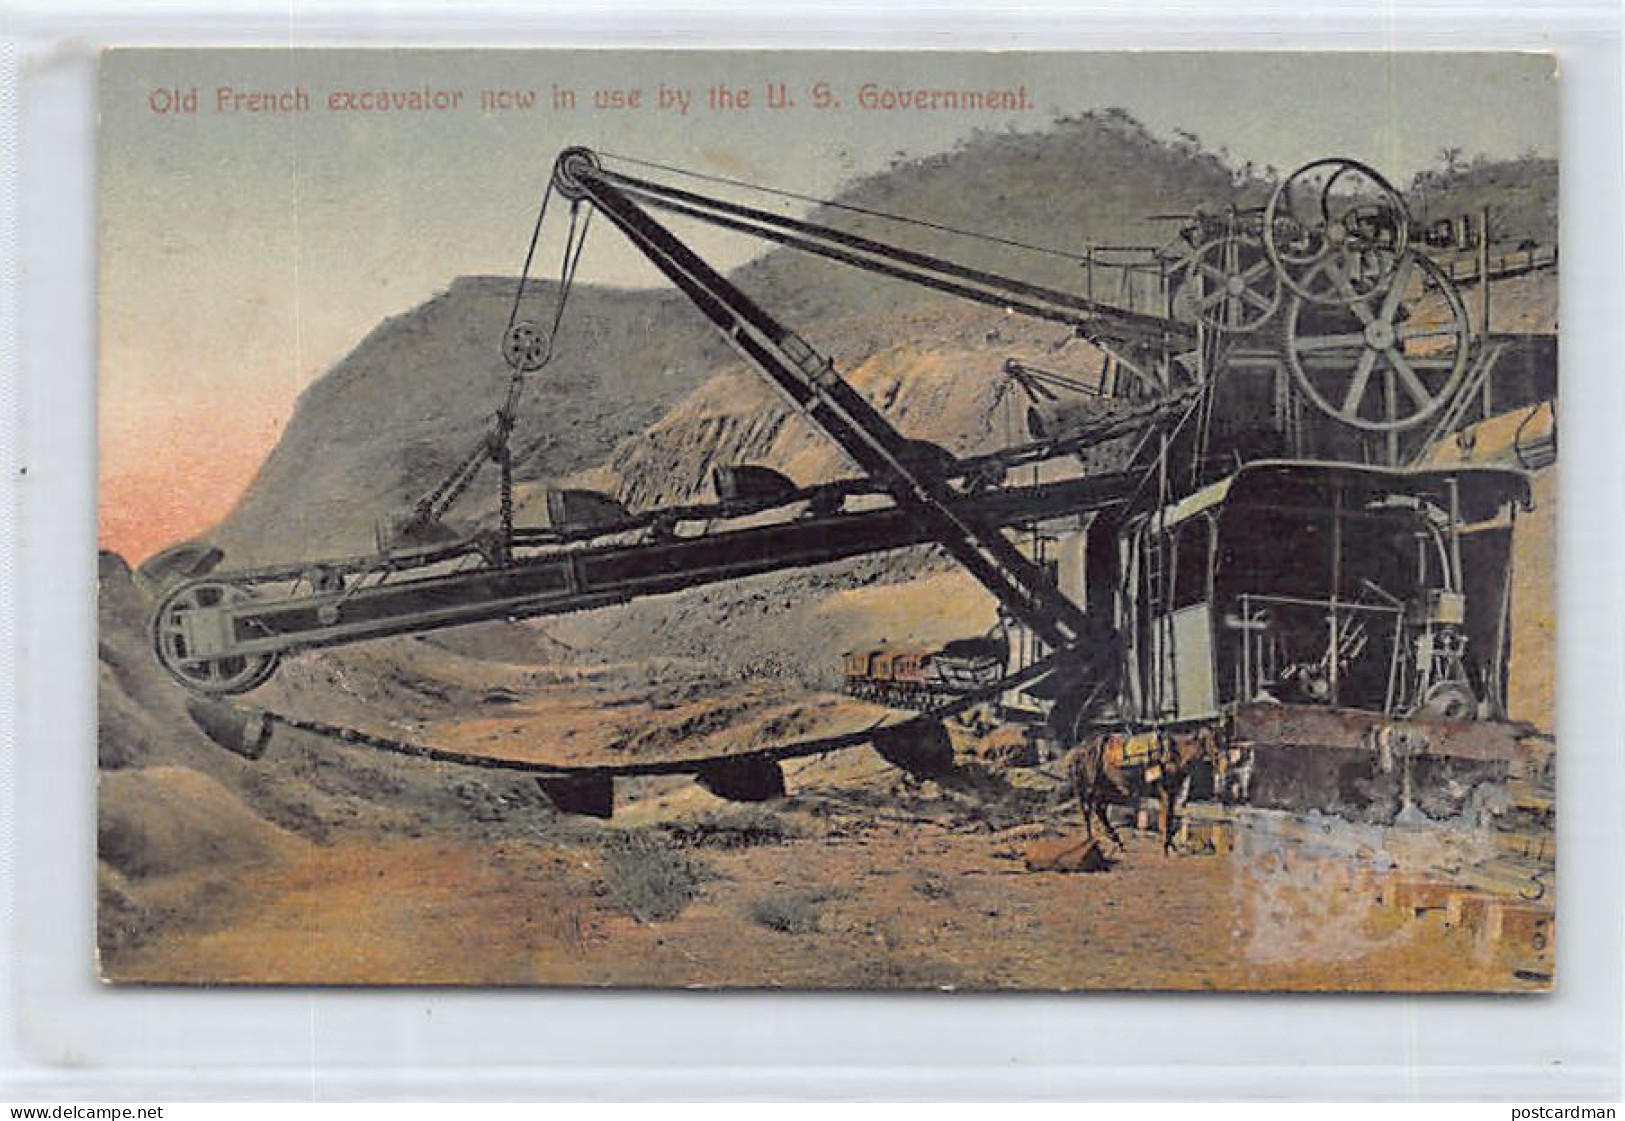 PANAMA CANAL - Old French Excavator Now In Use By The U.S. Government - SEE SCANS FOR CONDITION - Publ. I. L. Maduro Jr. - Panama